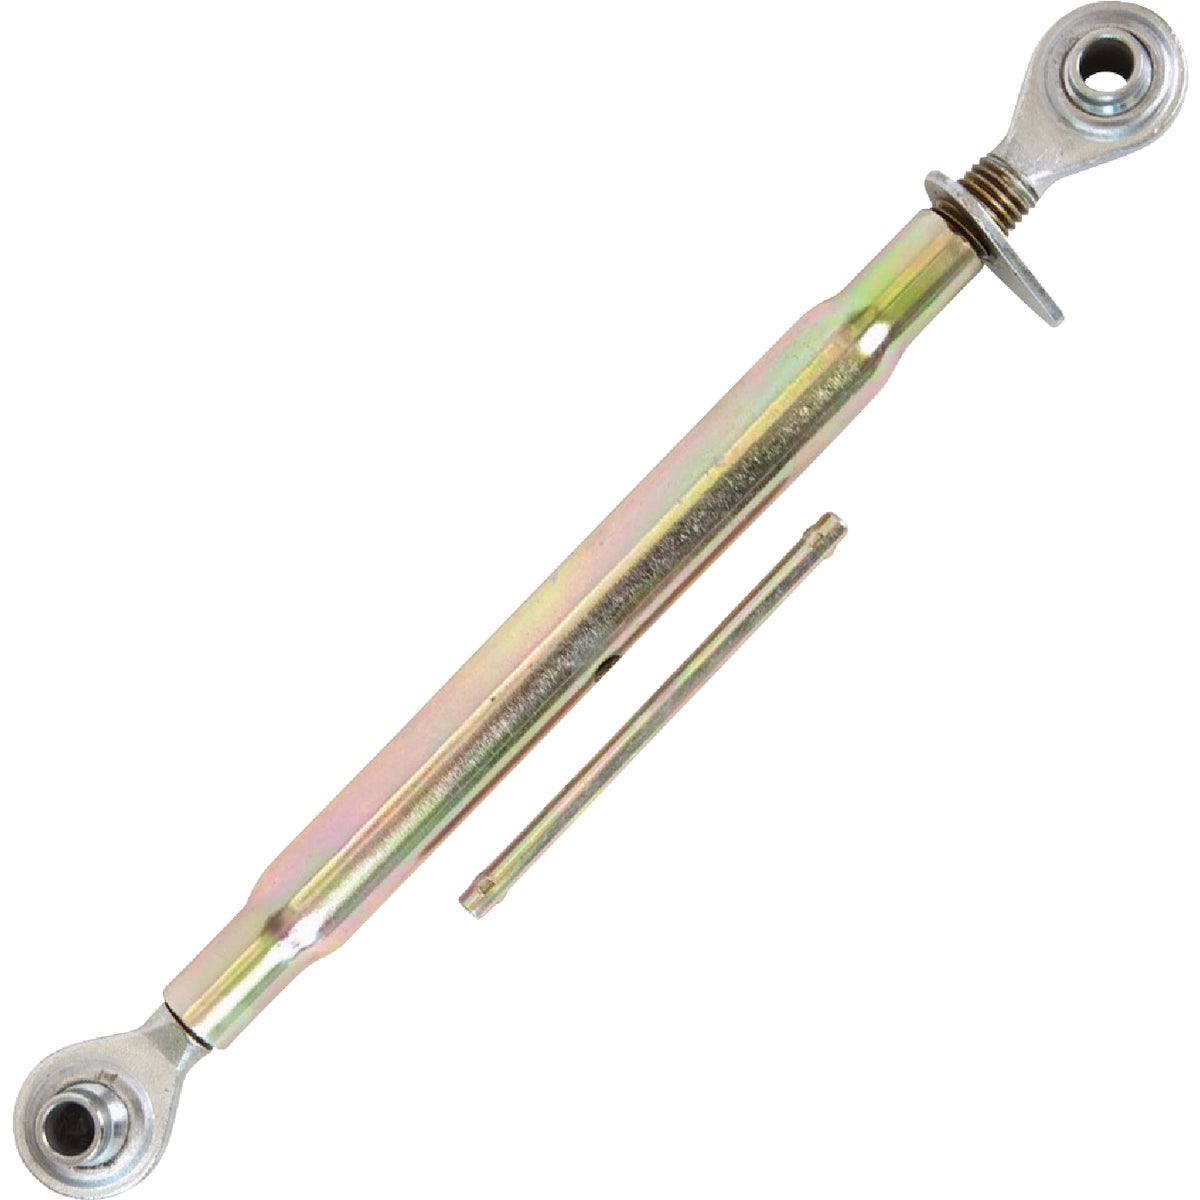 Item 759588, Yellow zinc plated top link. Available for category 0 through 3 tractors.